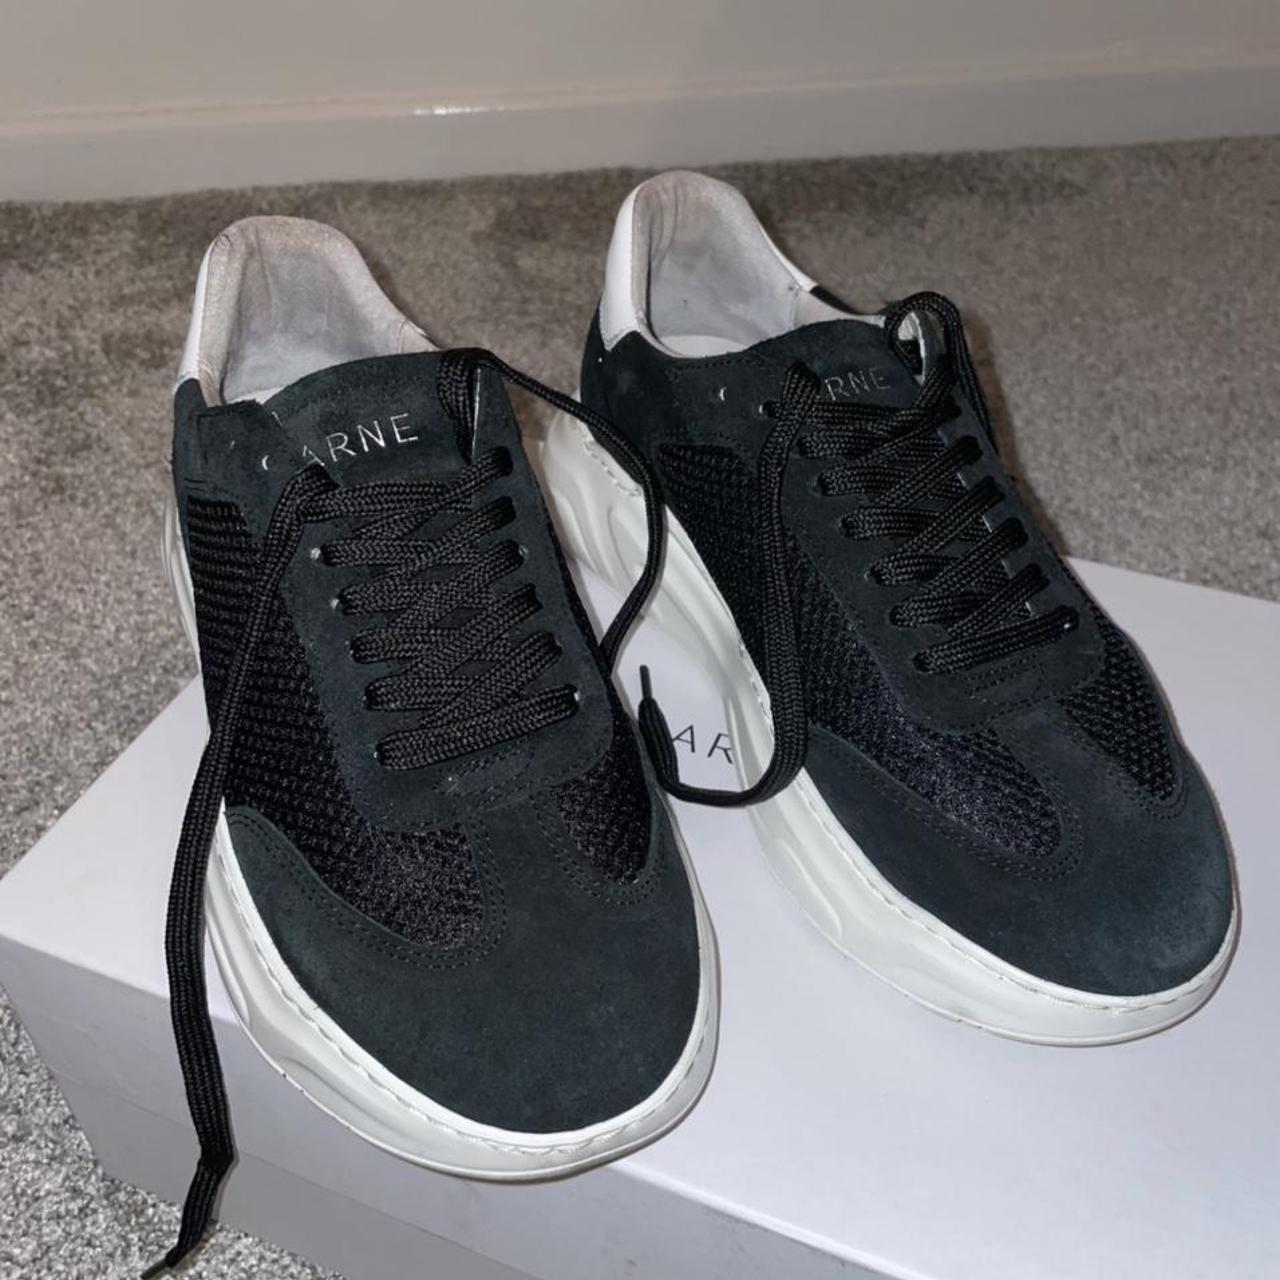 As good as new size 3 arne clo trainers. Only worn a... - Depop